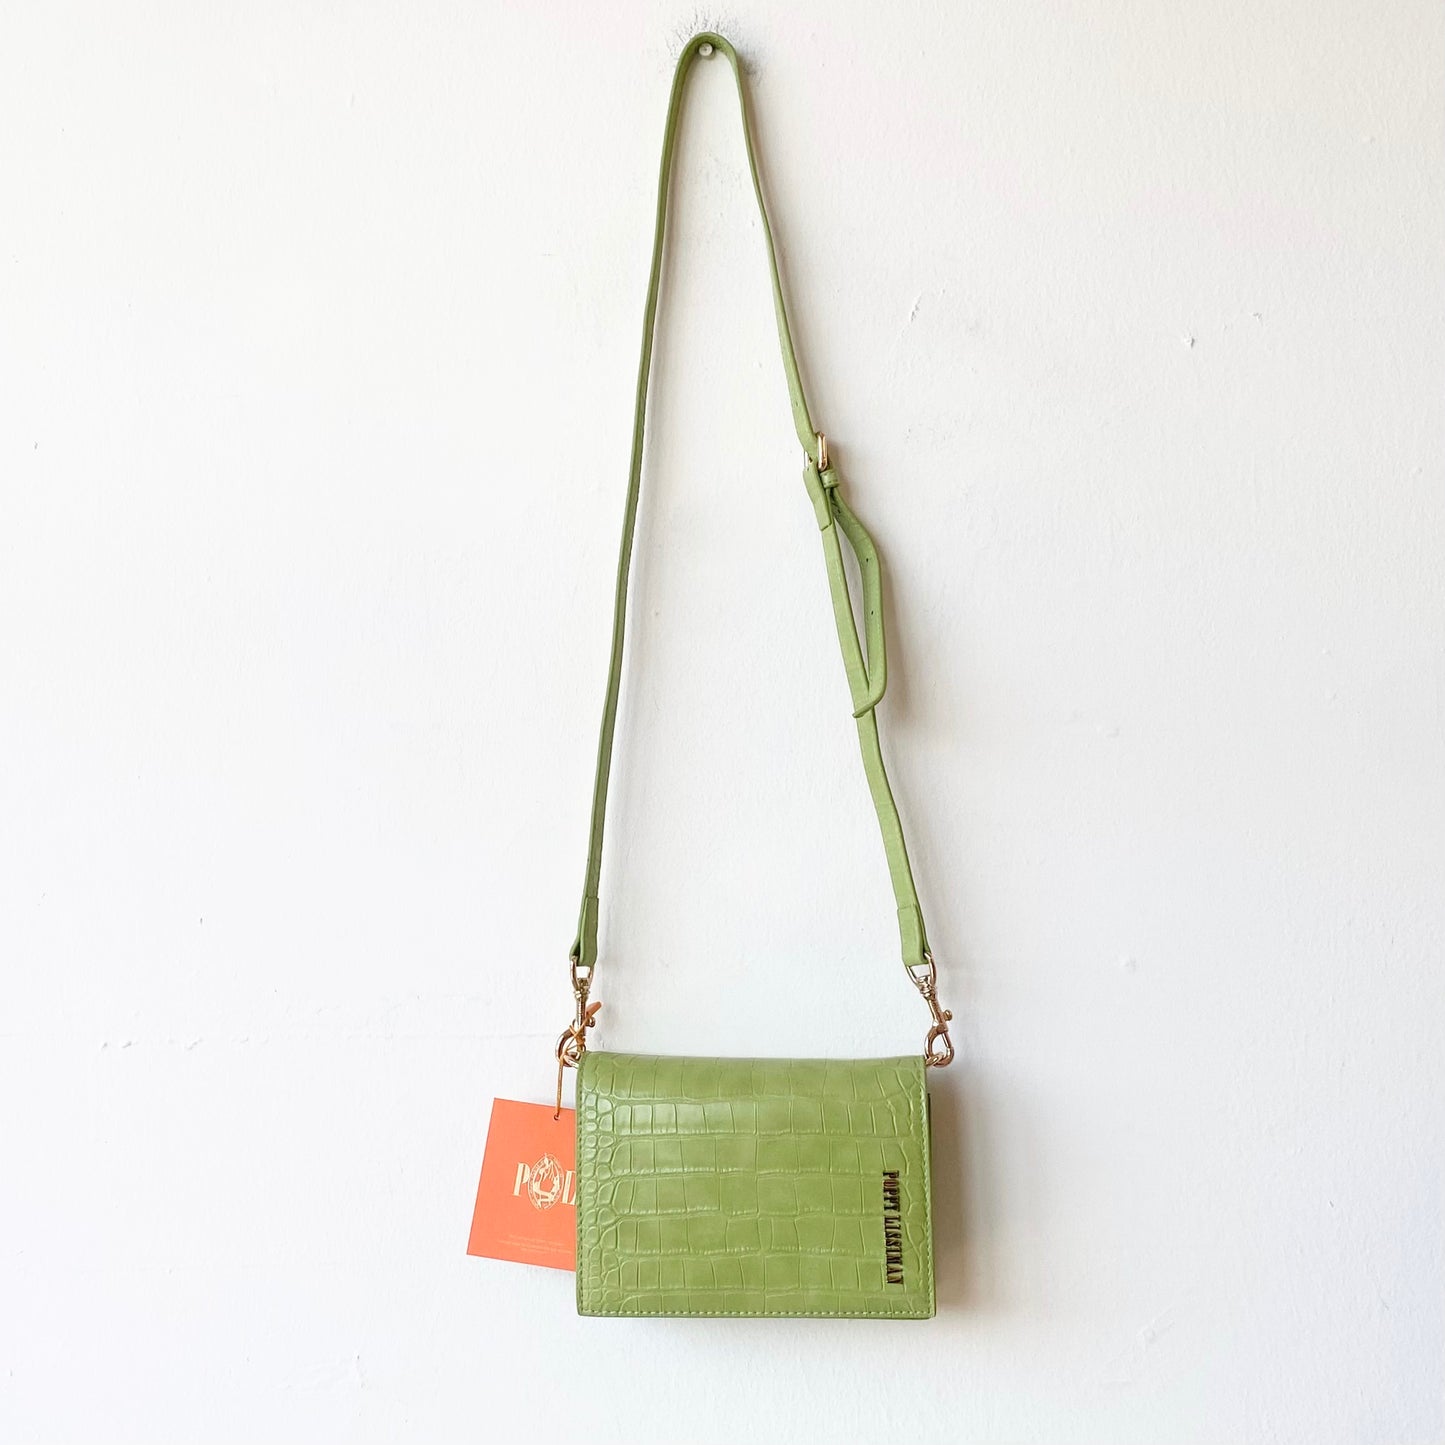 Poppy Lissiman Flap Bag in Lime Croc